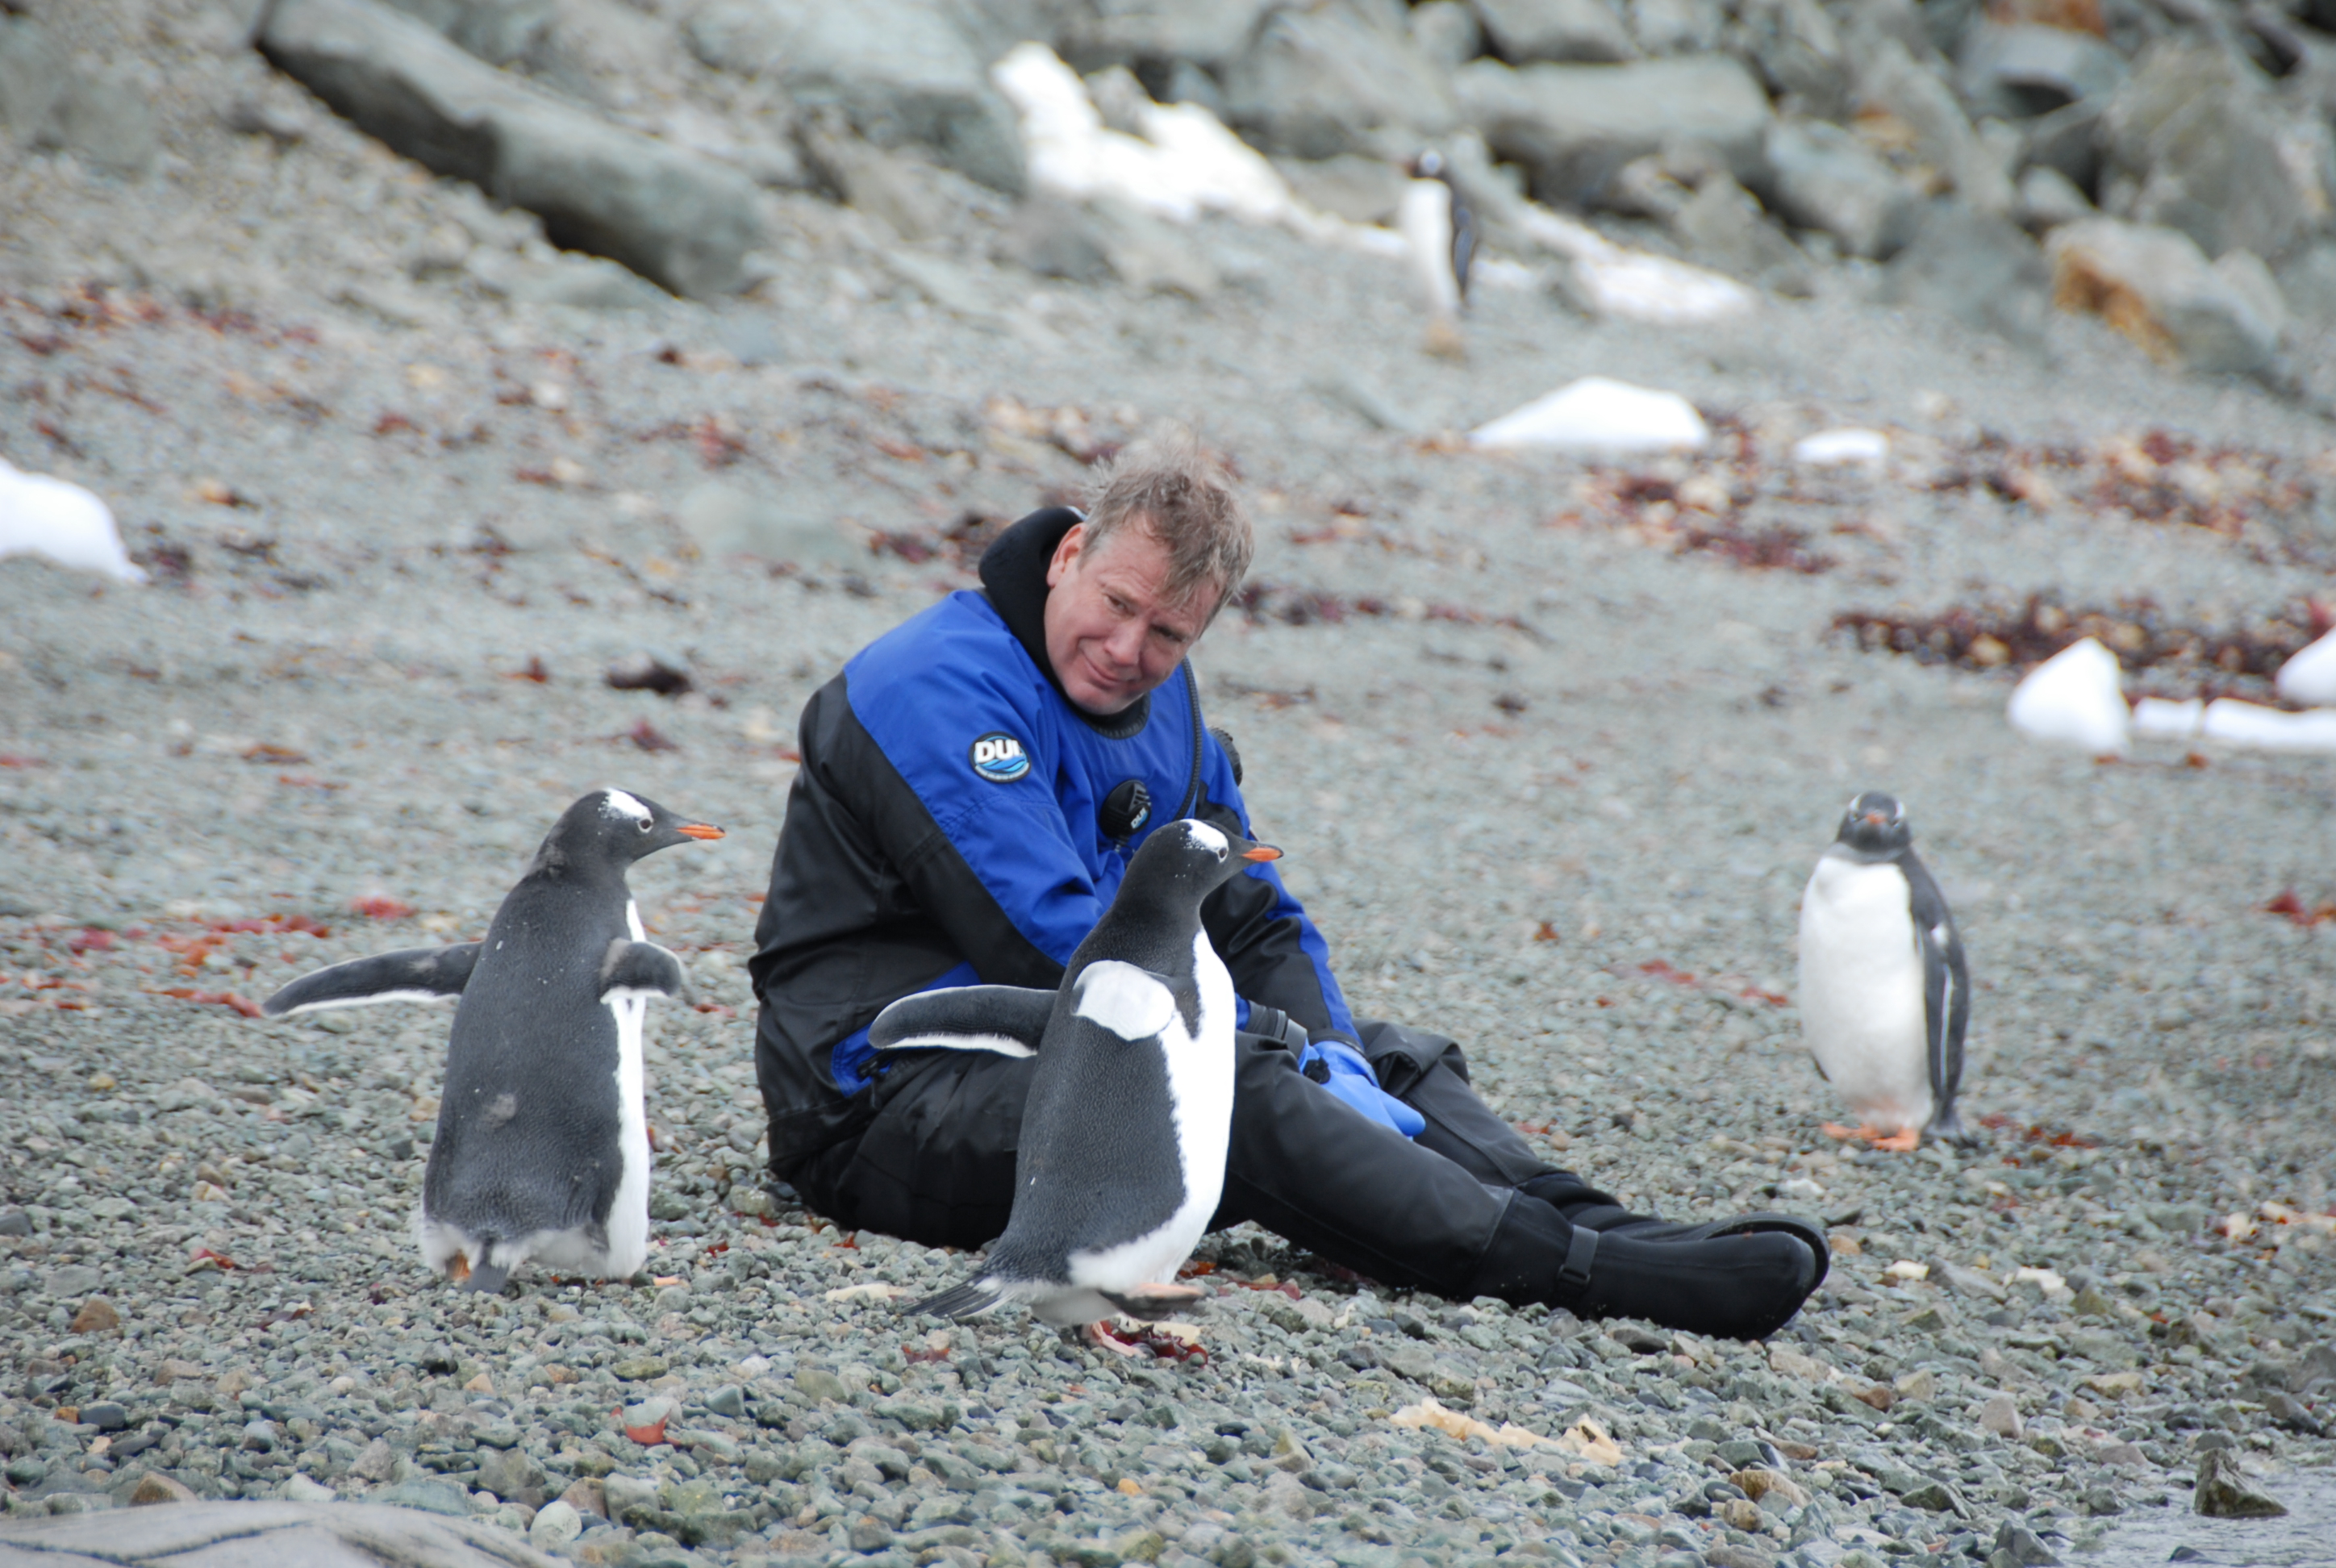 Antarctica - Diver in a drysuit surrounded by penguins on land